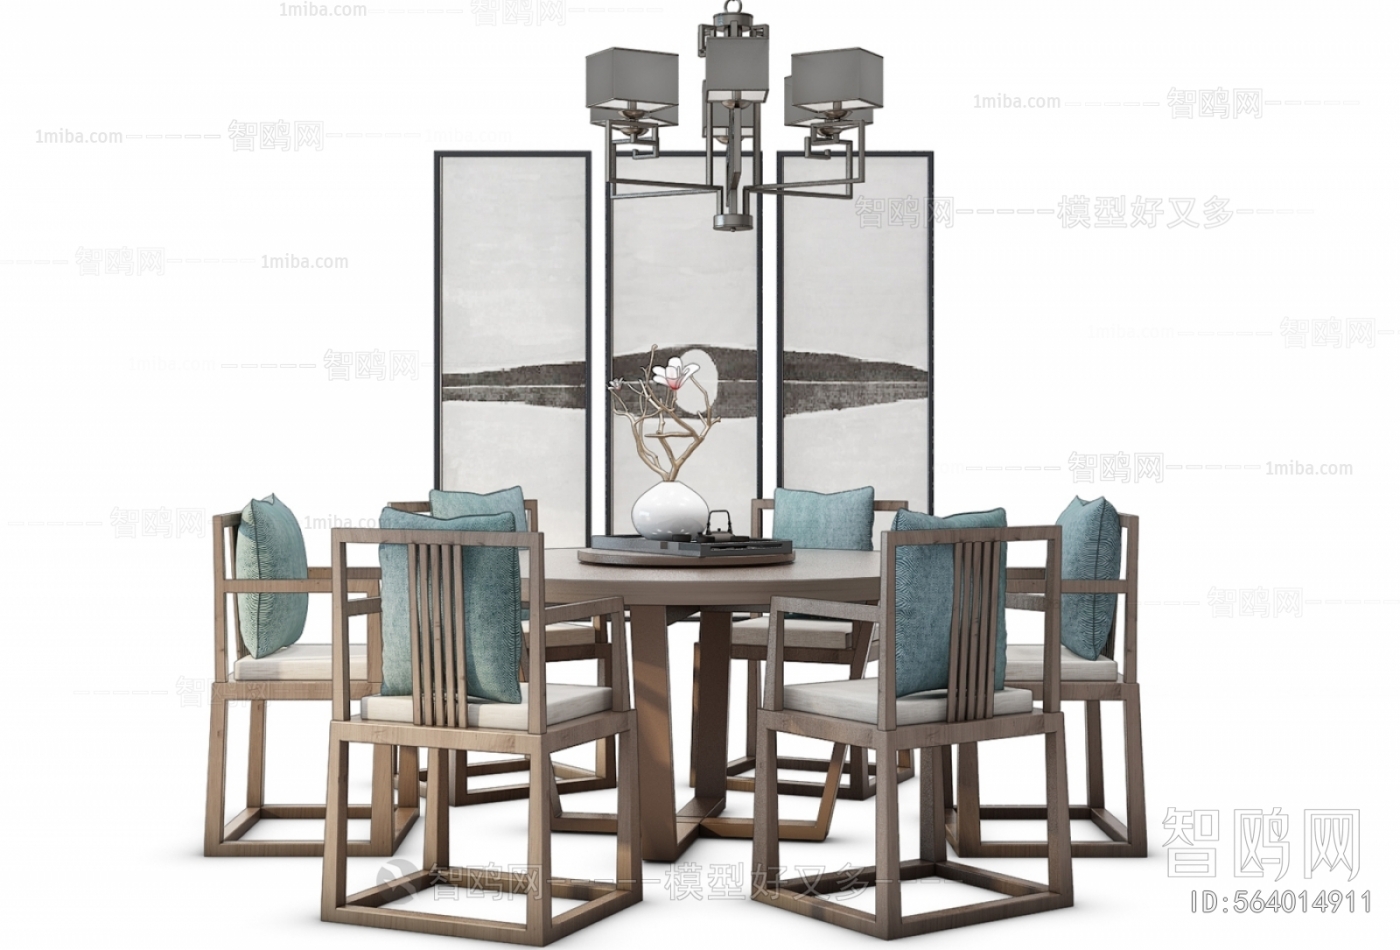 Chinese Style Dining Table And Chairs